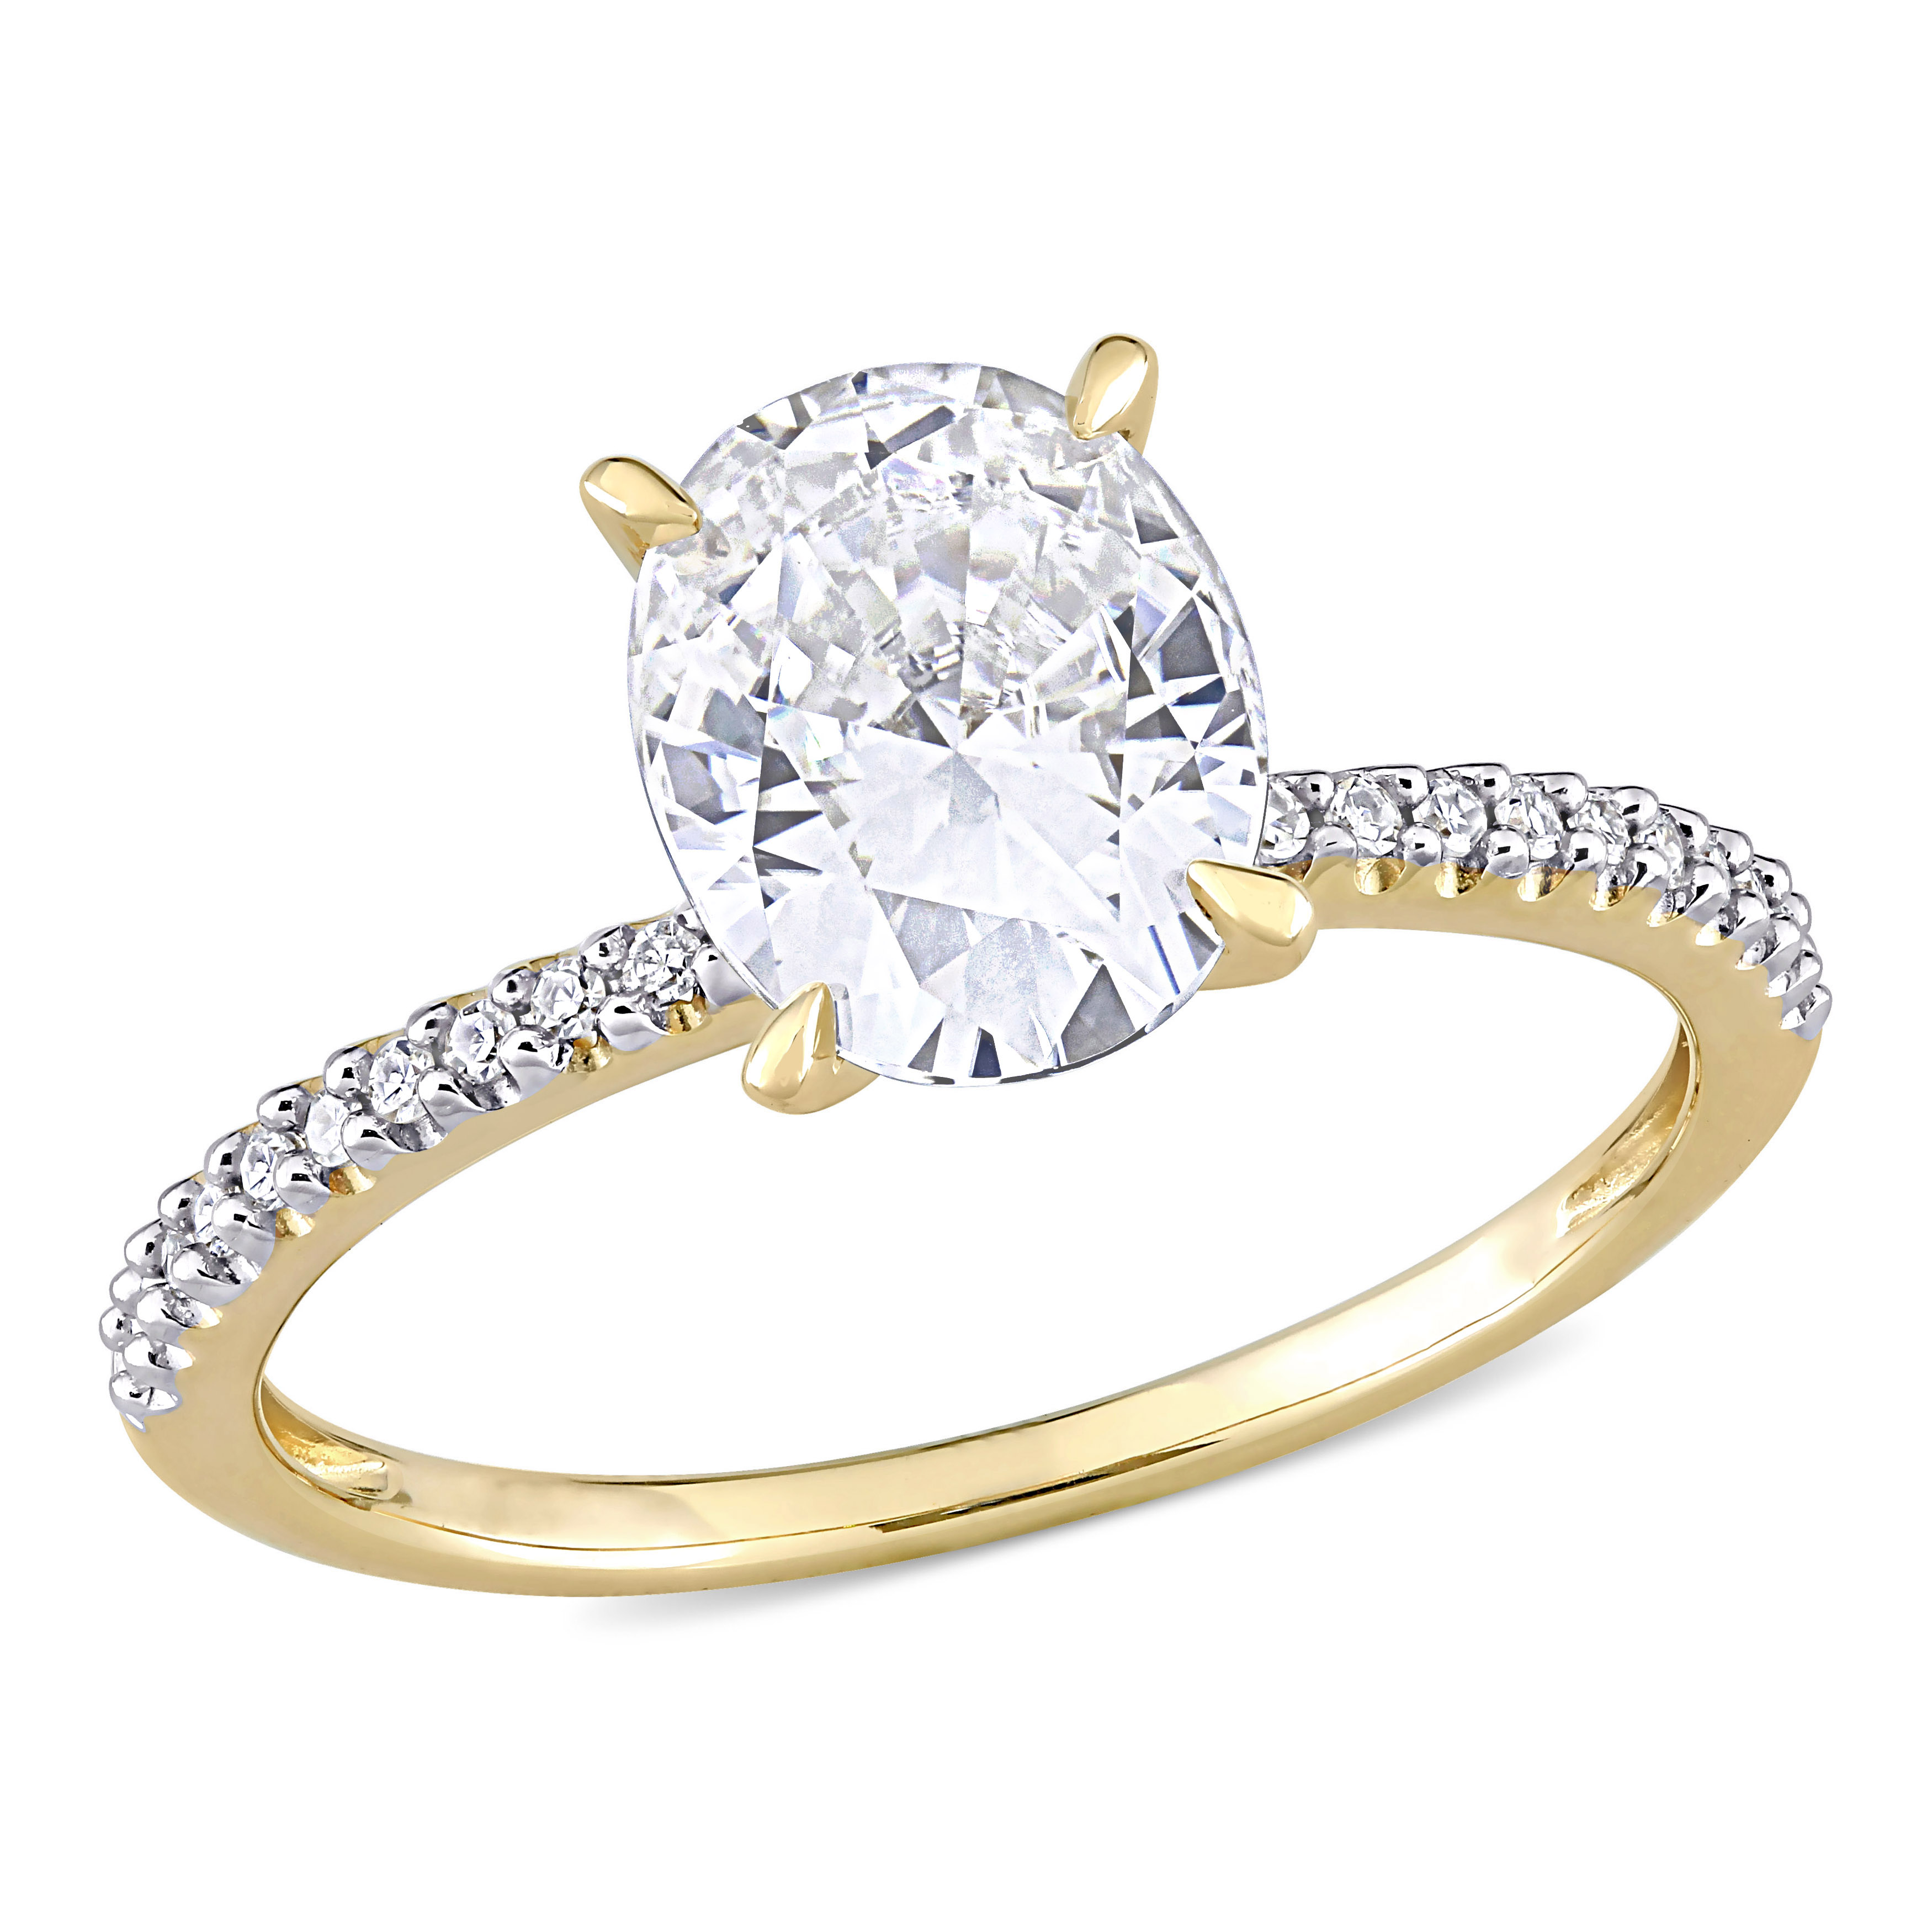 2 CT DEW Created White Moissanite and 1/10 CT TW Diamond Oval Solitaire Engagement Ring in 14k Yellow Gold